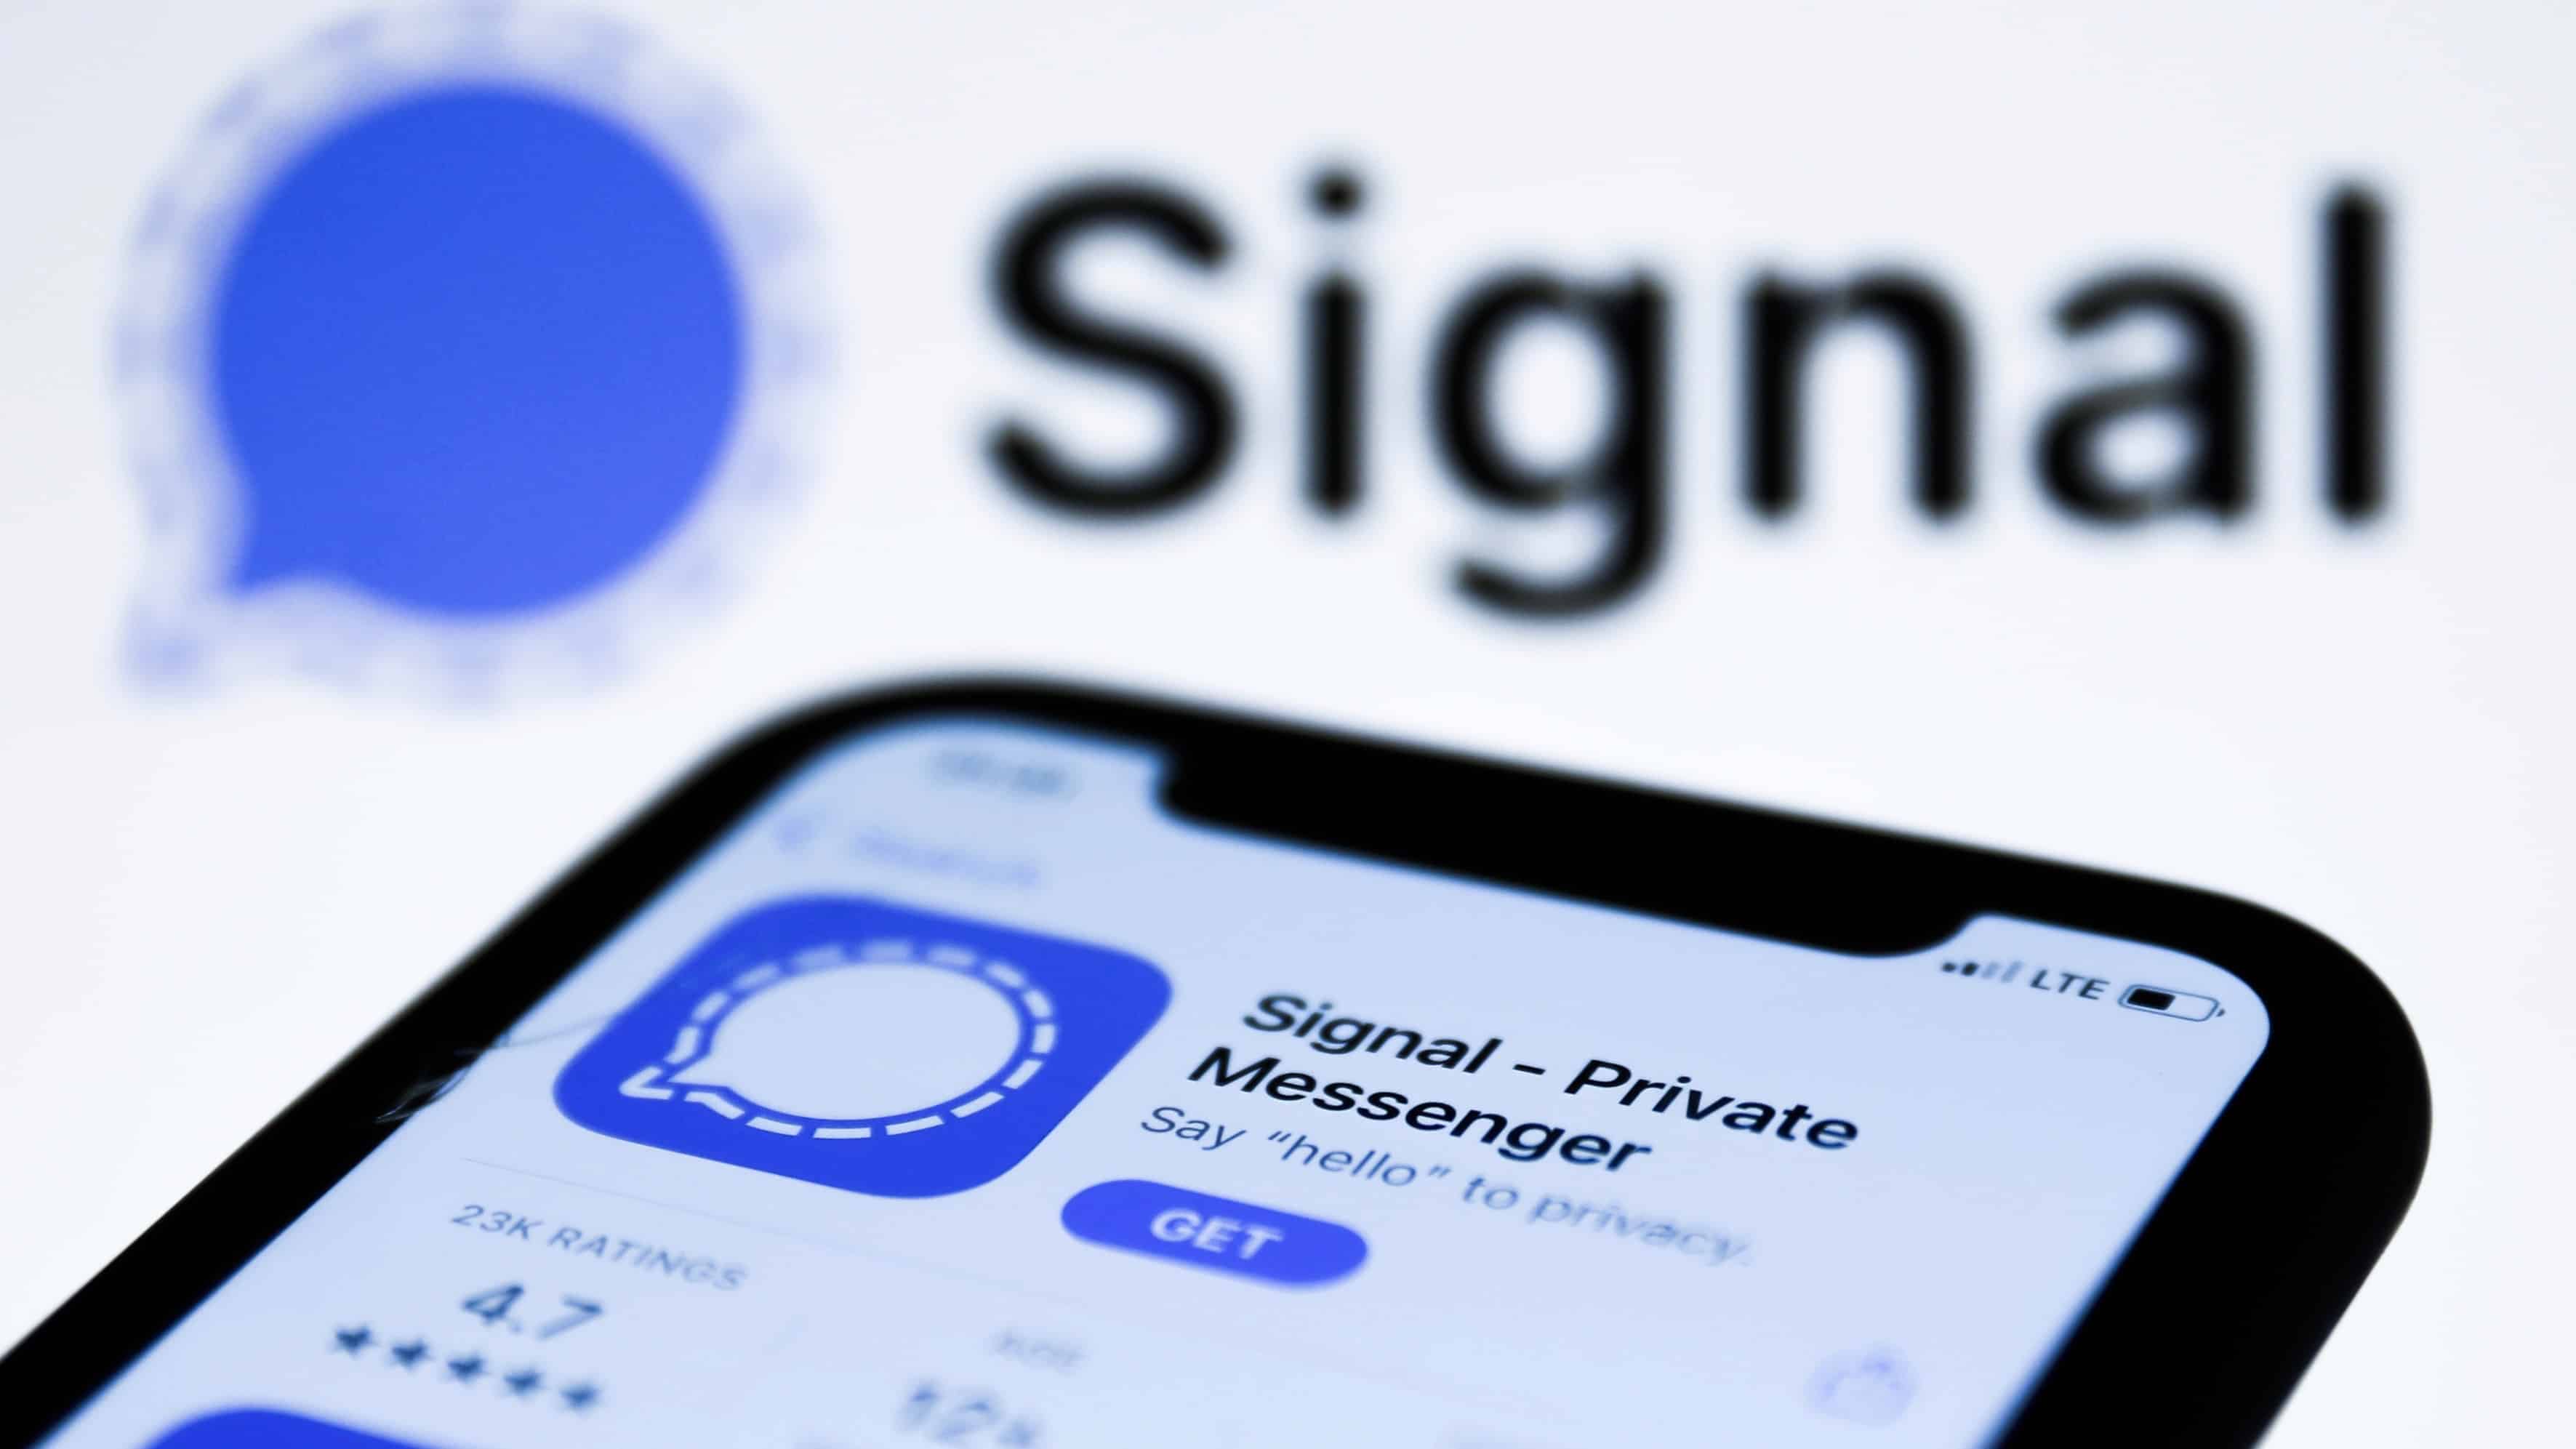 Signal faces global outage days after downloaded by millions of new users